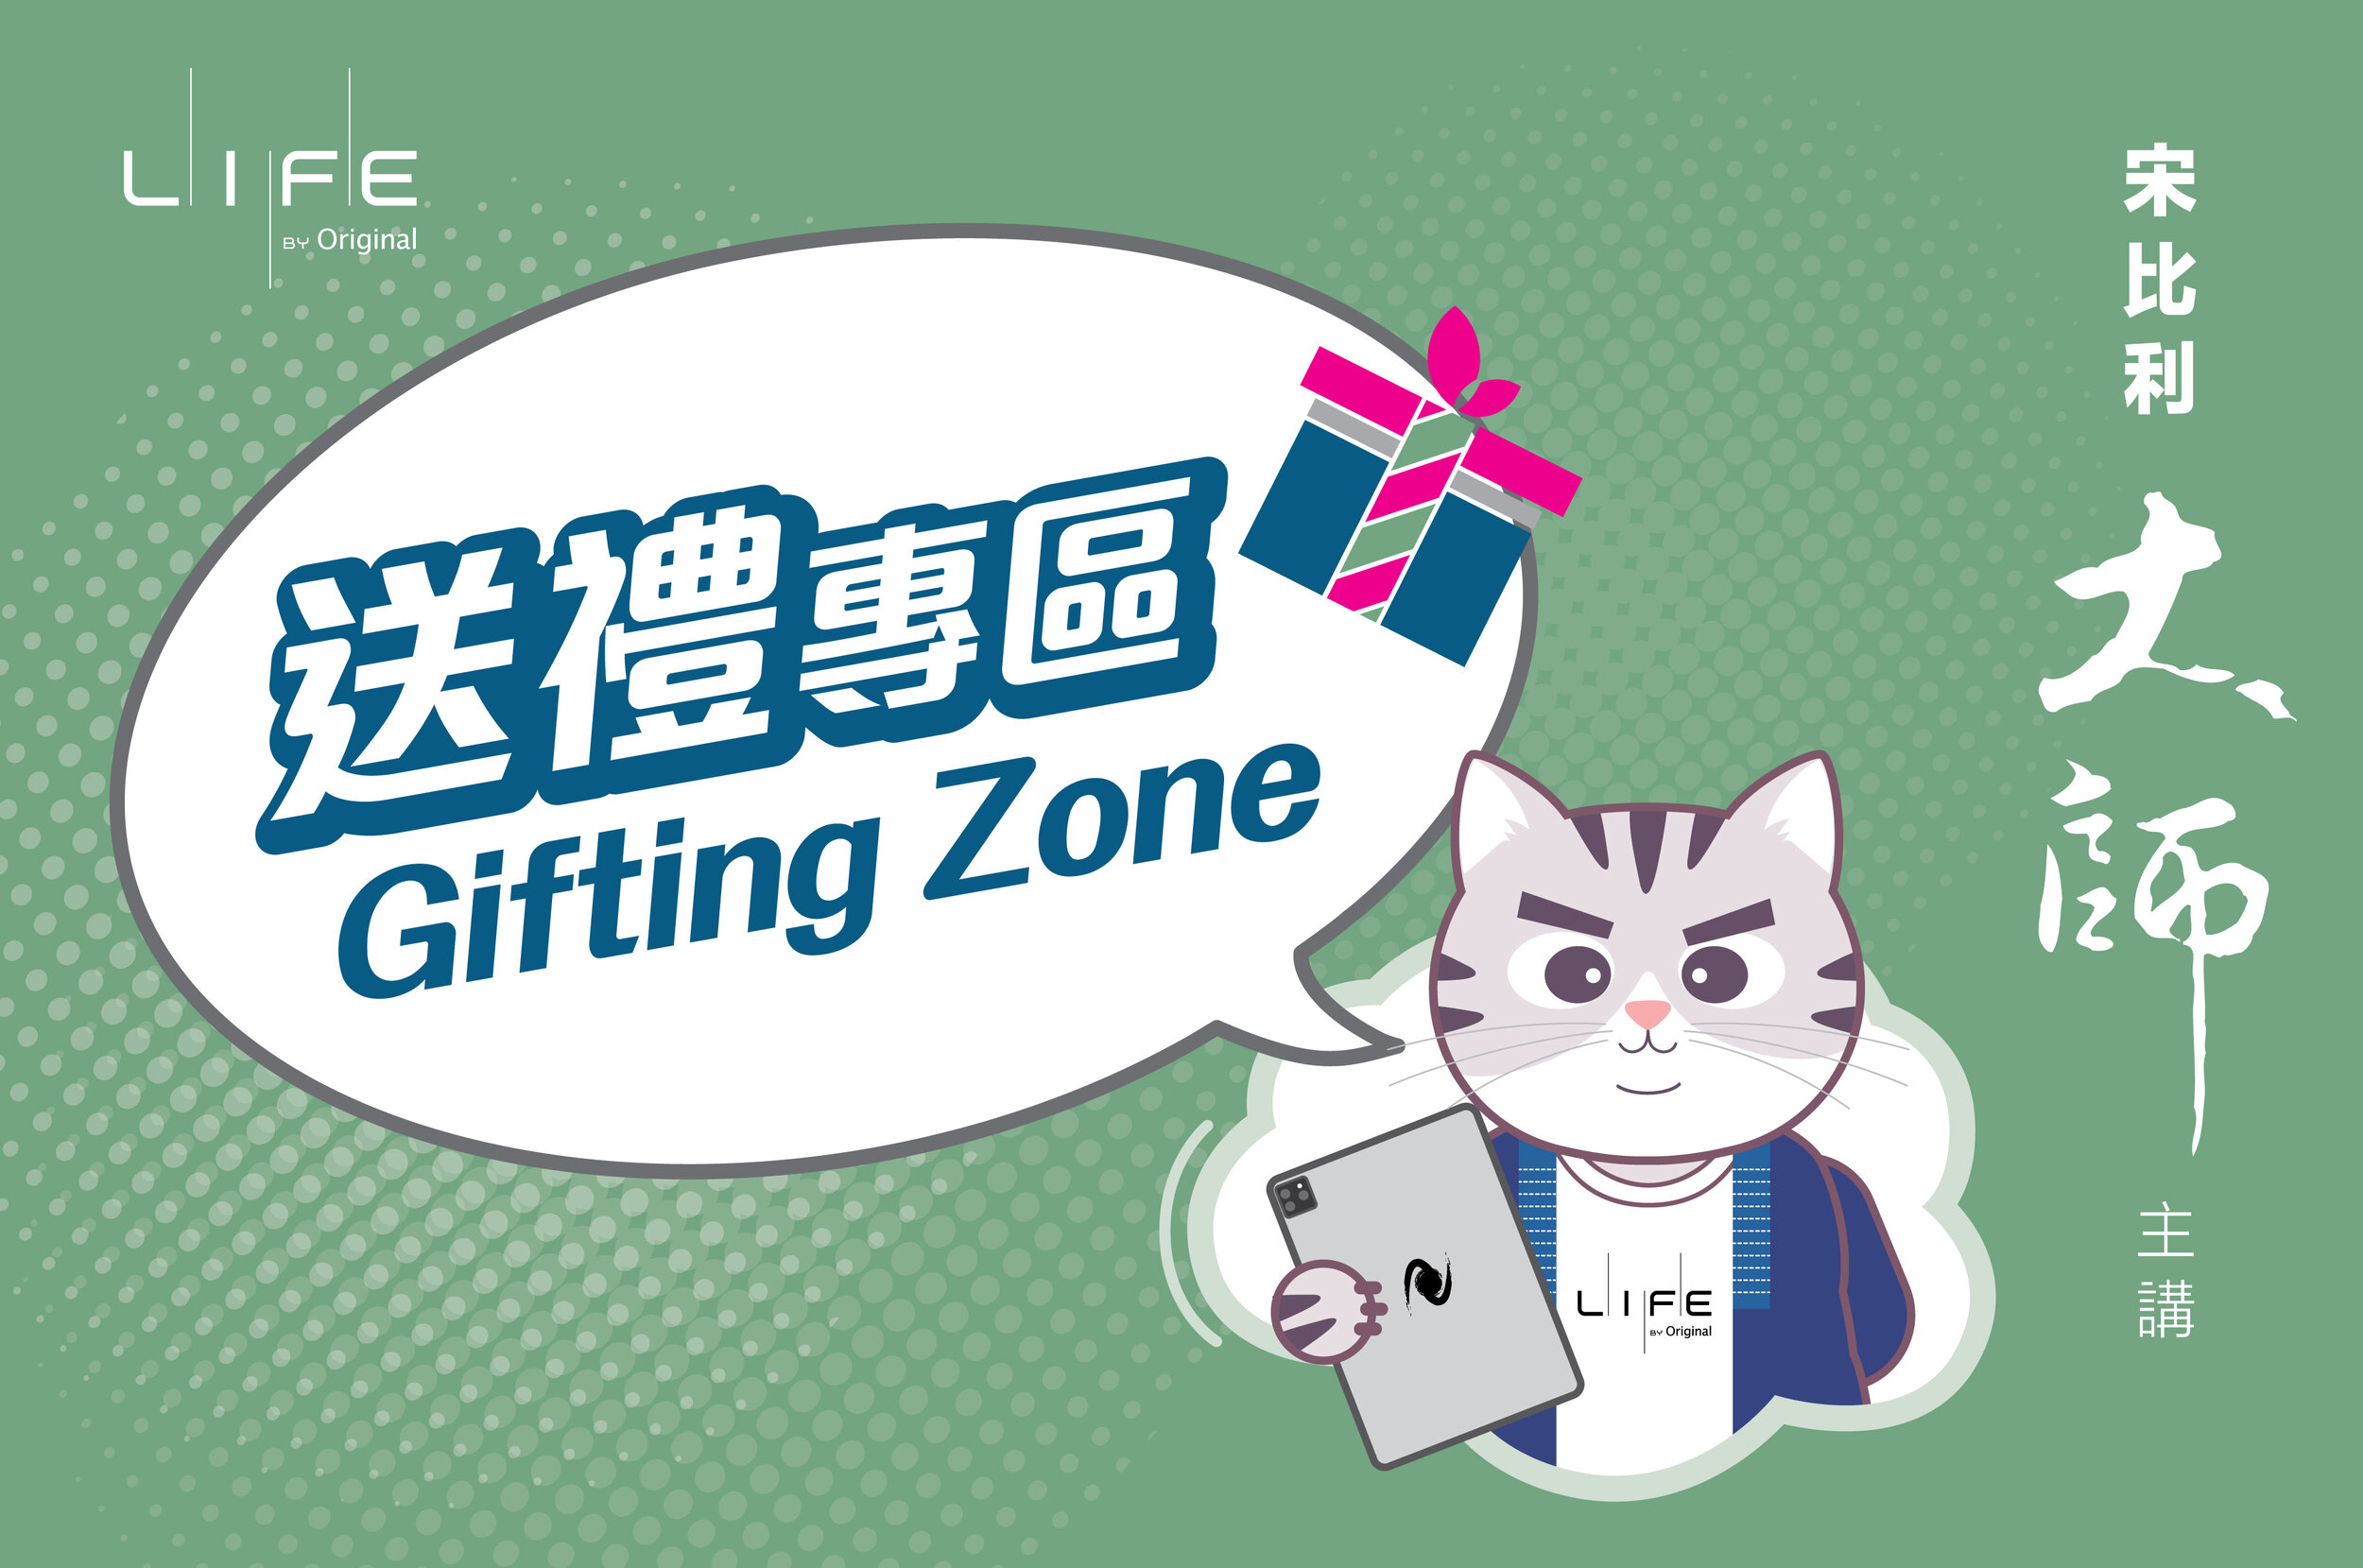 BS04_intro the gifting zone_FB_01_FB1.jpg